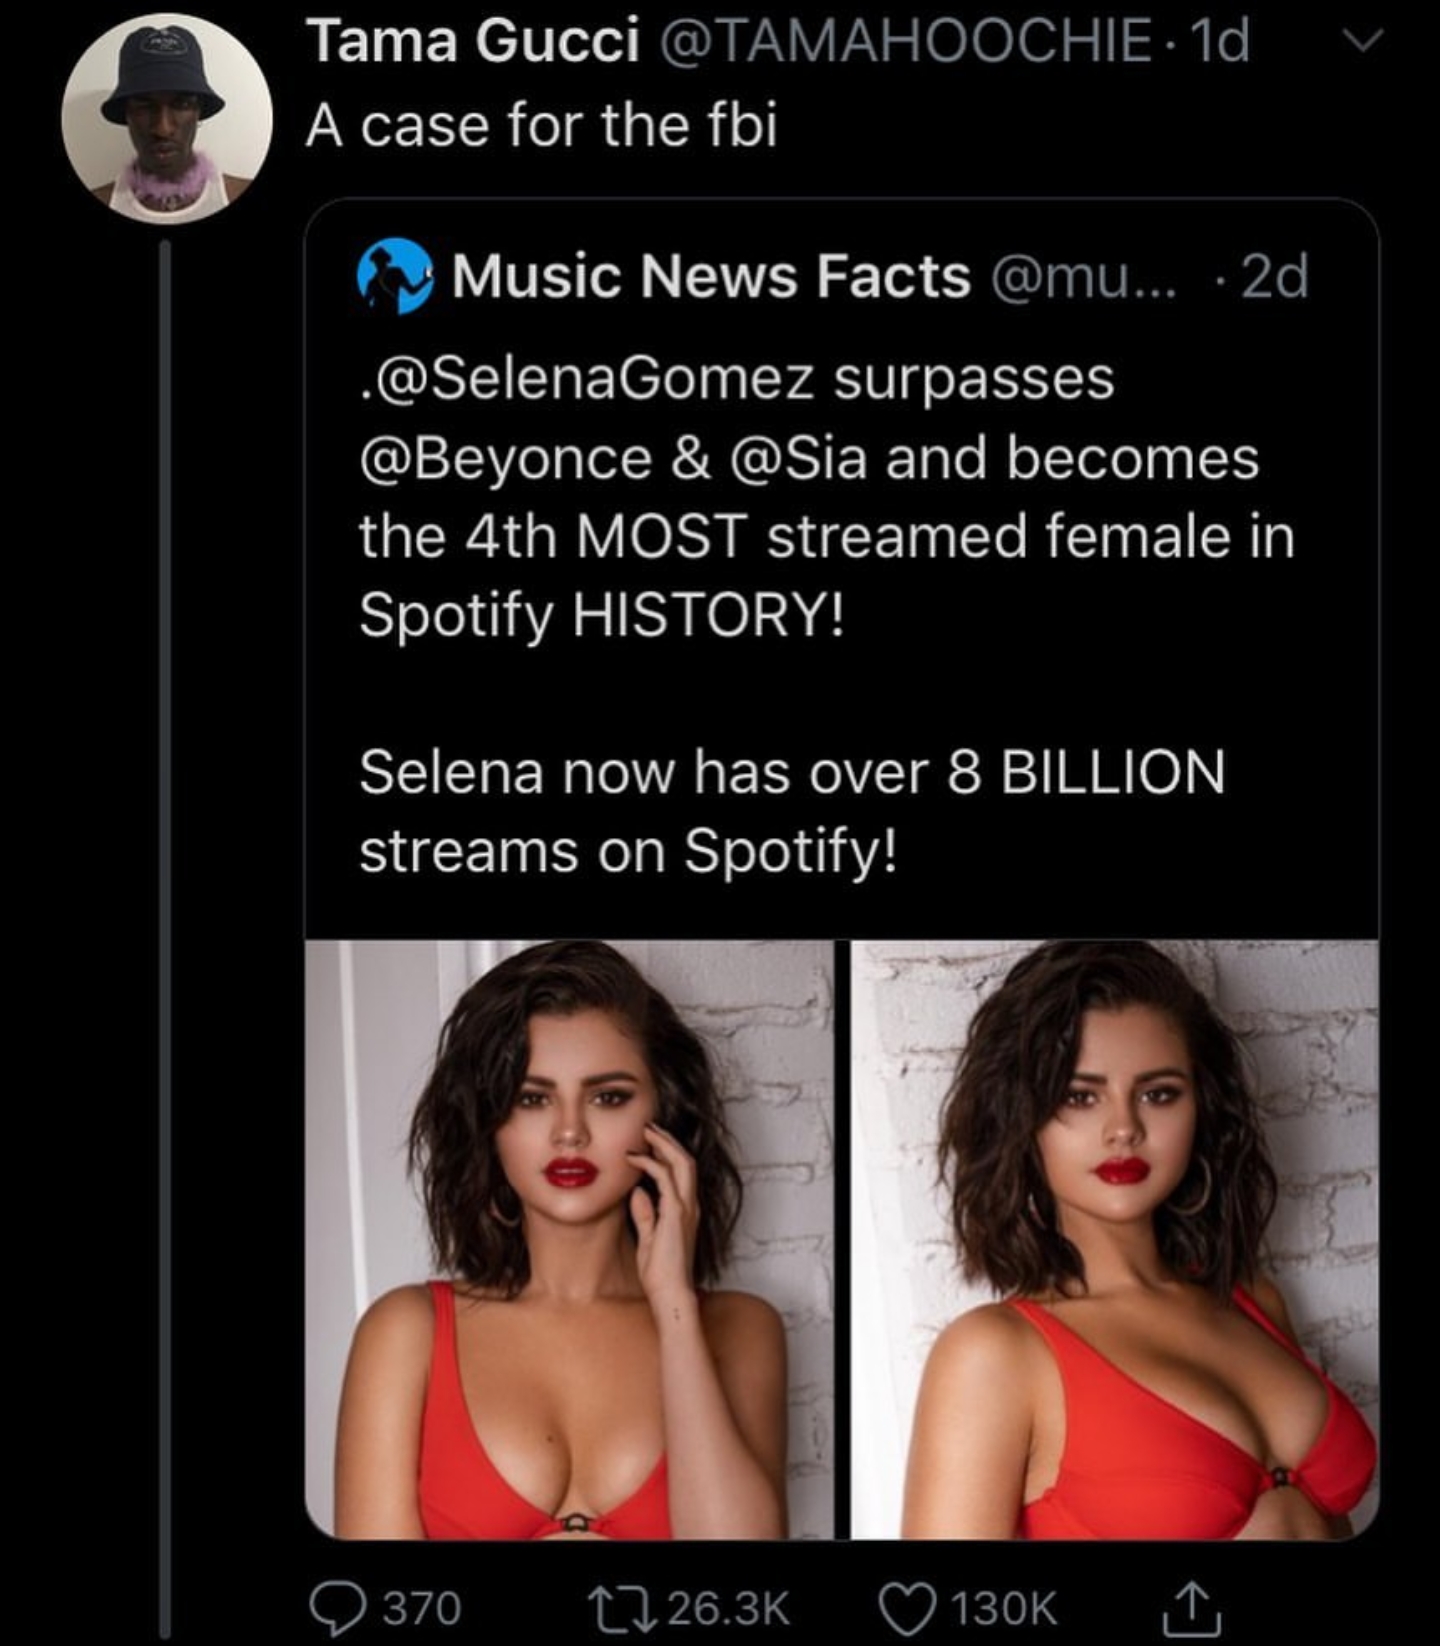 black hair - Tama Gucci A case for the fbi Music News Facts ... 2d . Gomez surpasses & and becomes the 4th Most streamed female in Spotify History! Selena now has over 8 Billion streams on Spotify! 370